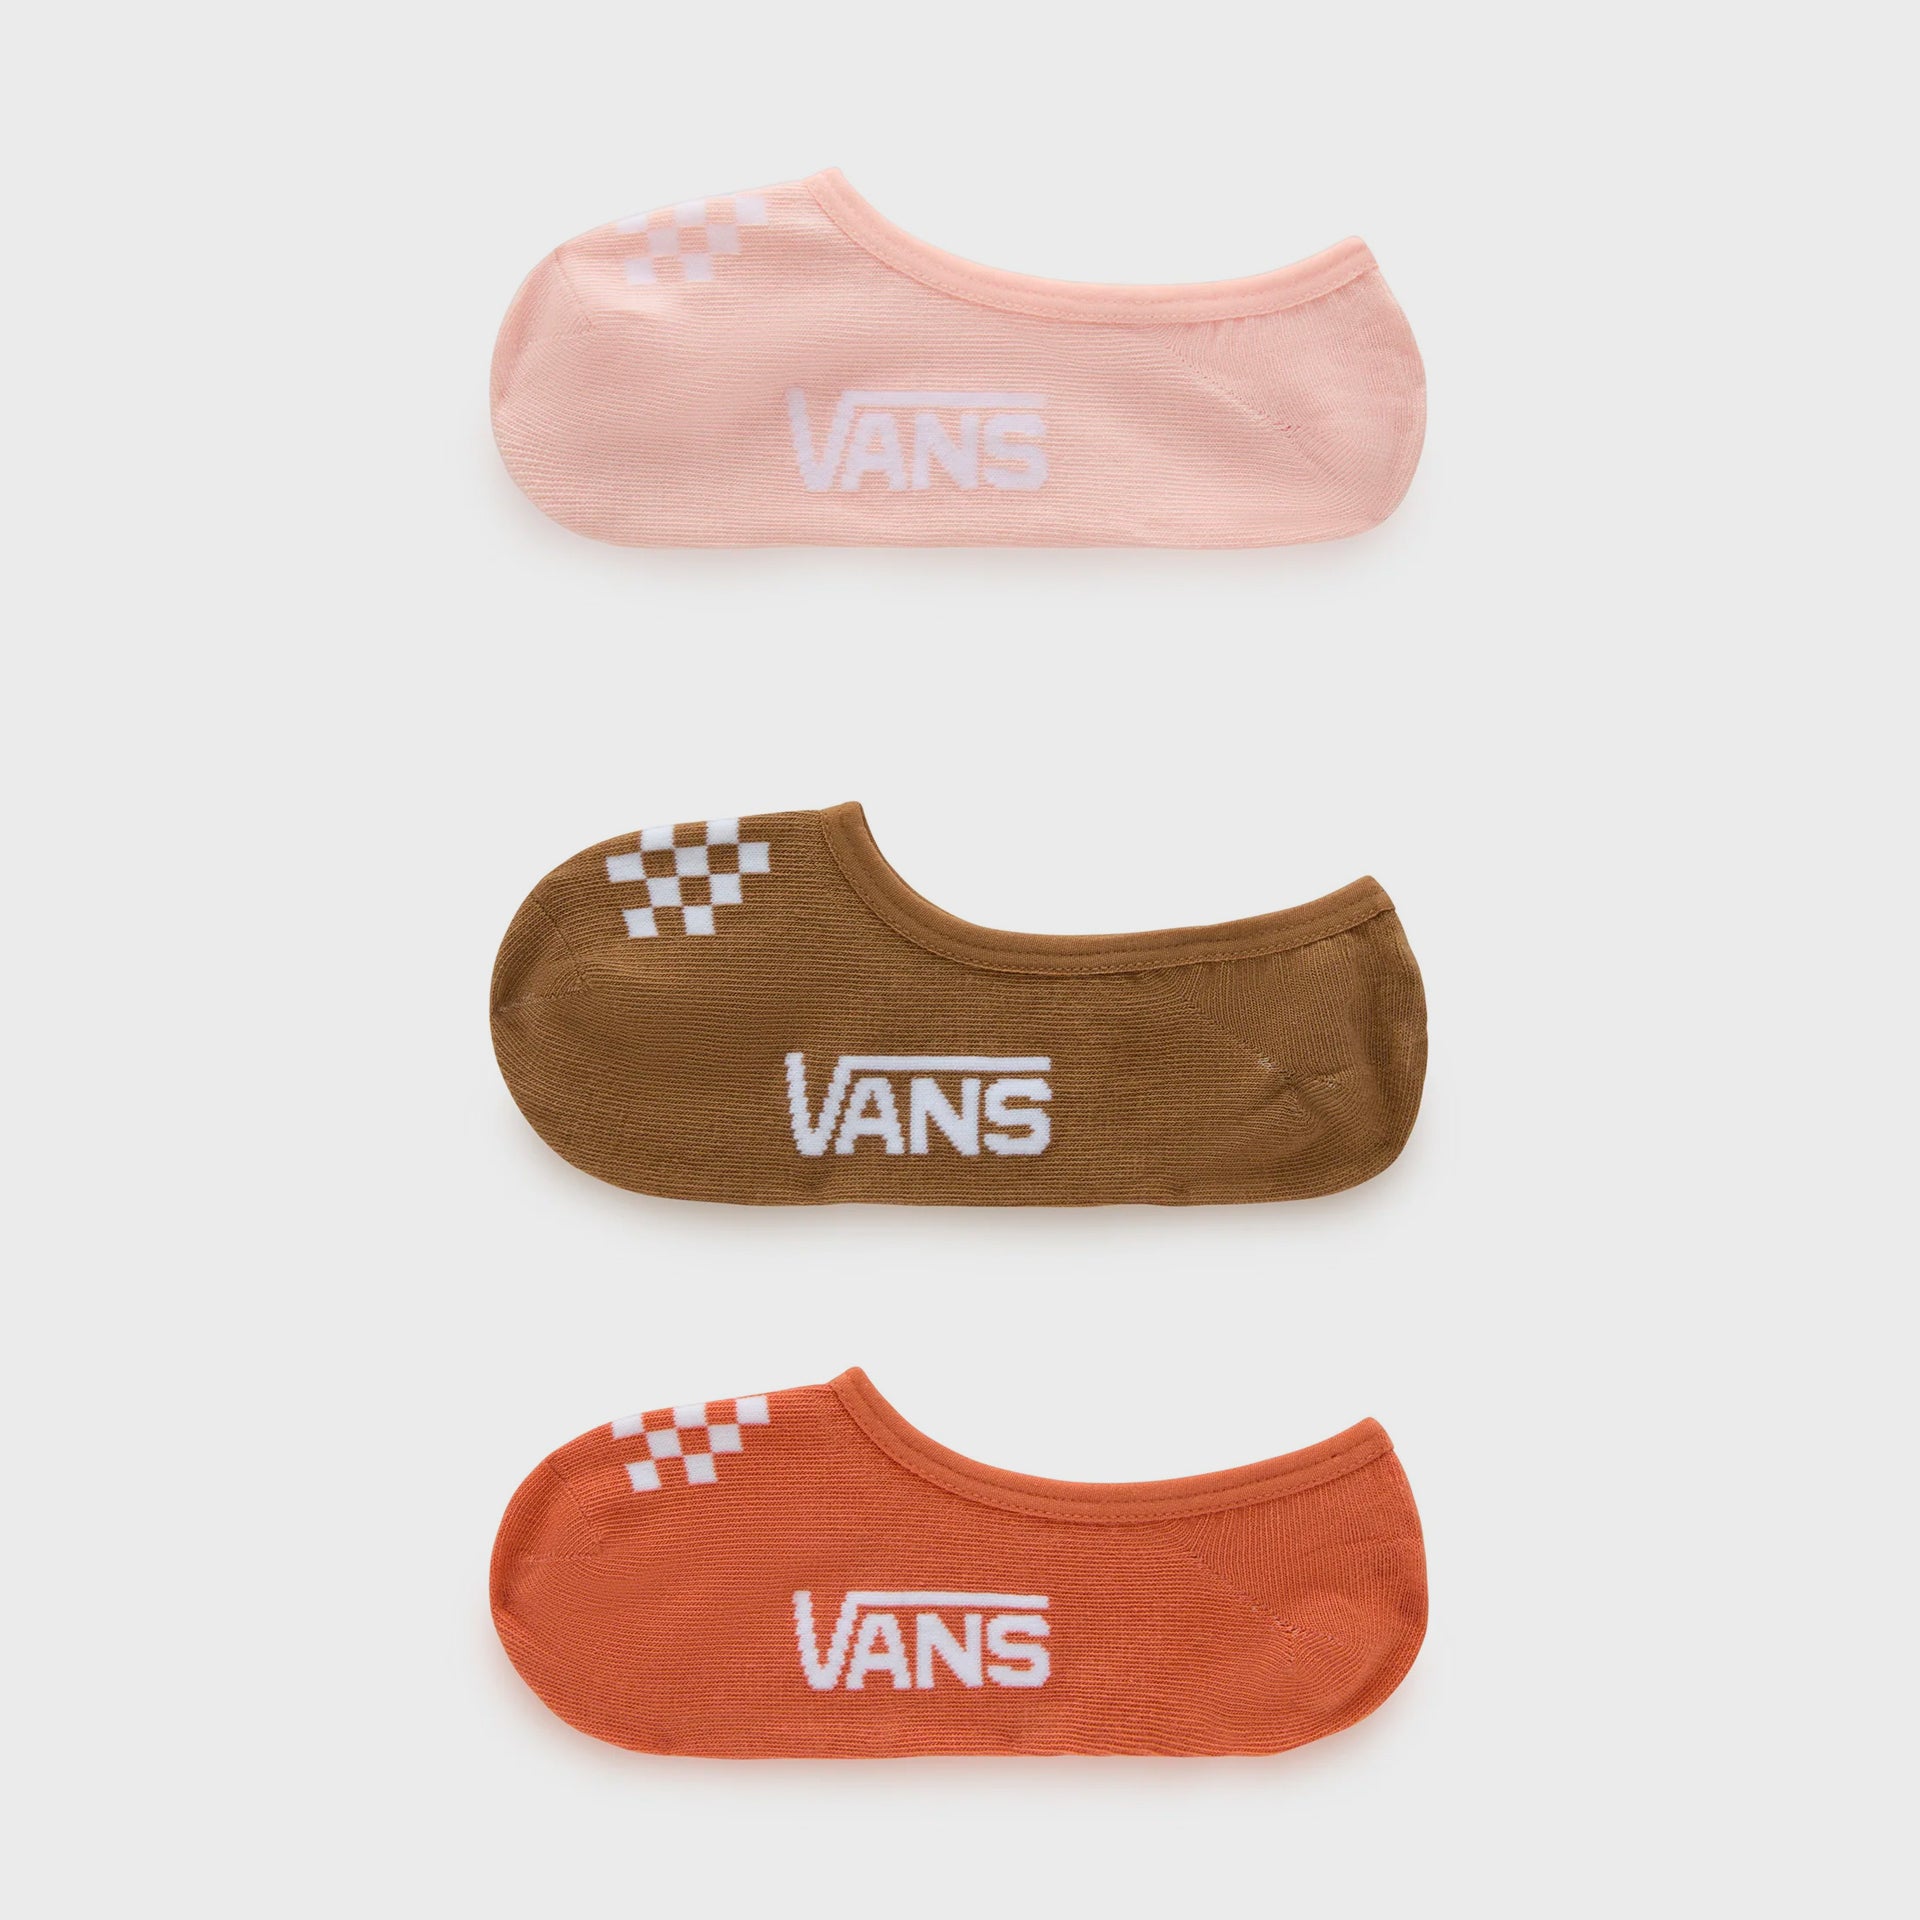 Vans Womens Classic Canoodle (3 Pack) - One Size (6.5-10) - Autumn Leaf - ManGo Surfing